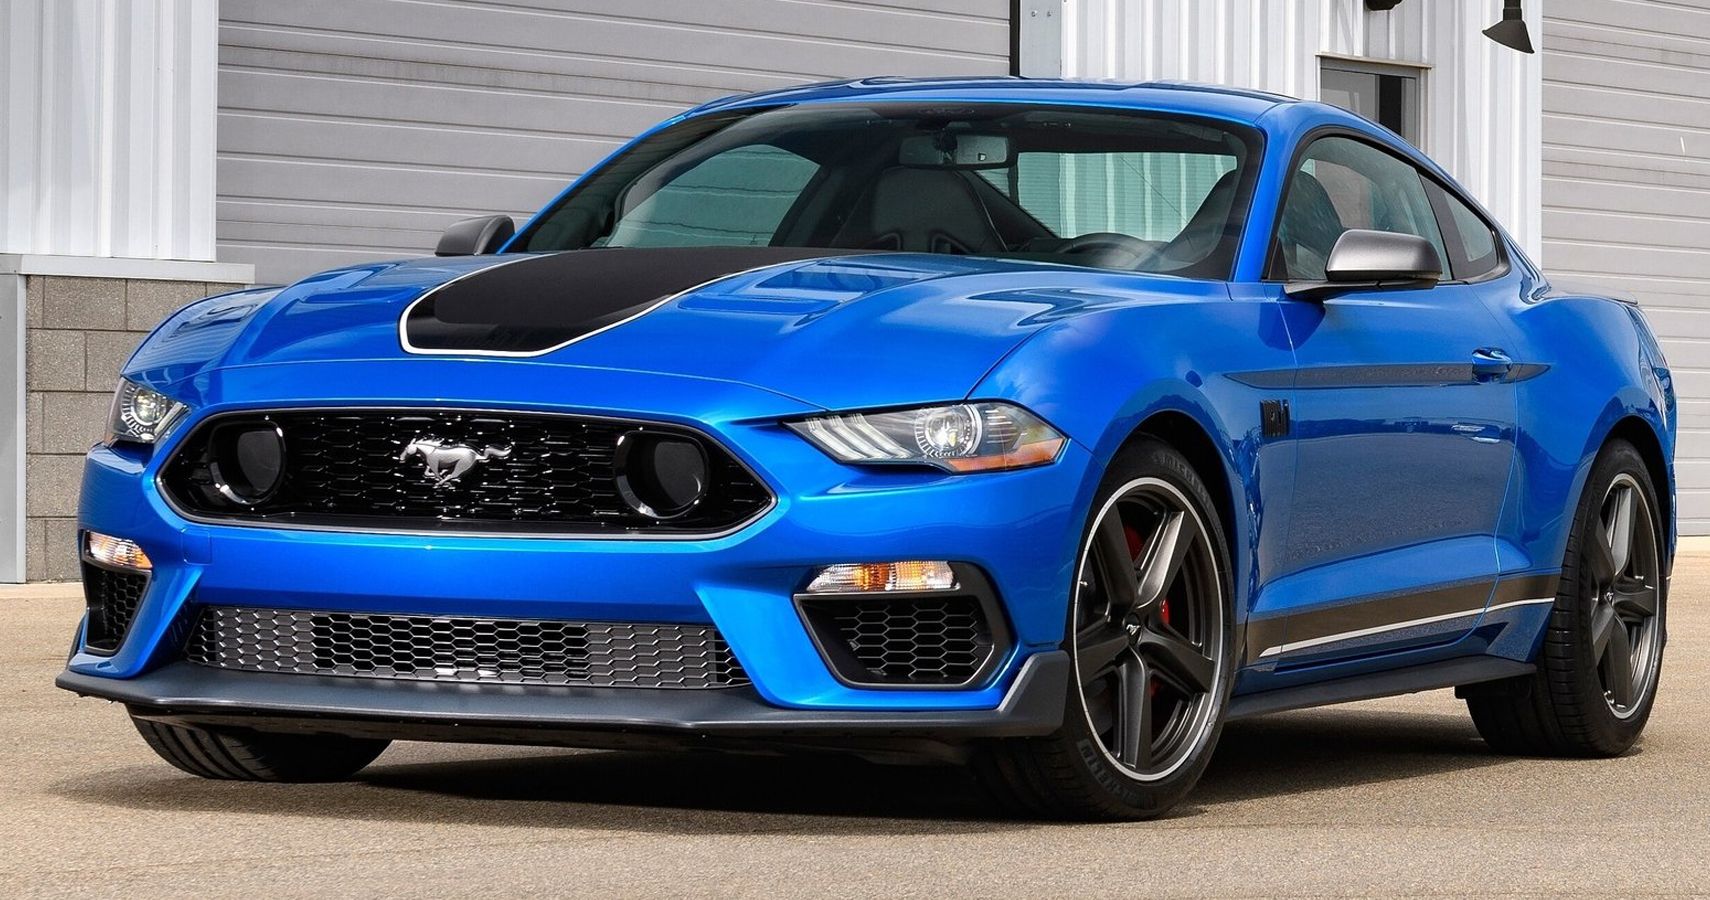 Ford Mustang S550 Mach 1 Front Quarter Velocity Blue Metallic